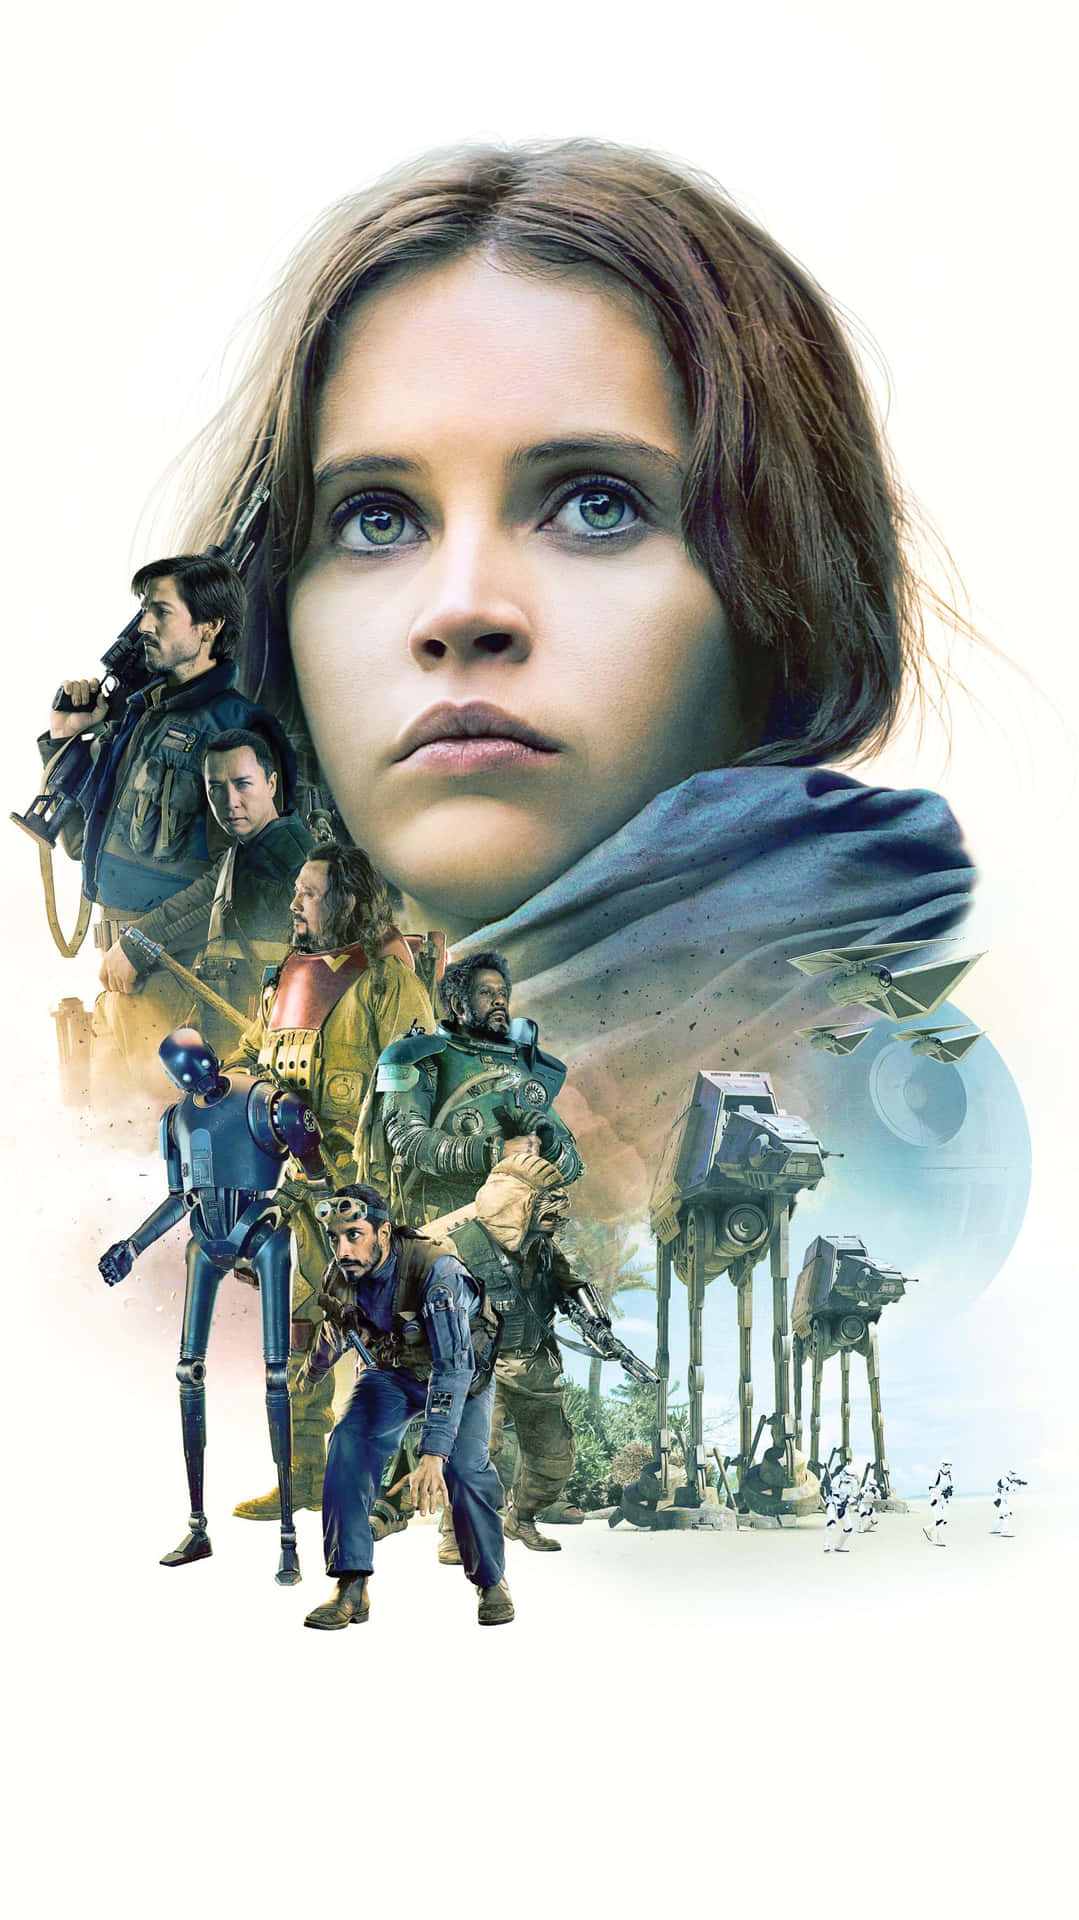 The Rebellion rallies together in the upcoming Rogue One: A Star Wars Story. Wallpaper